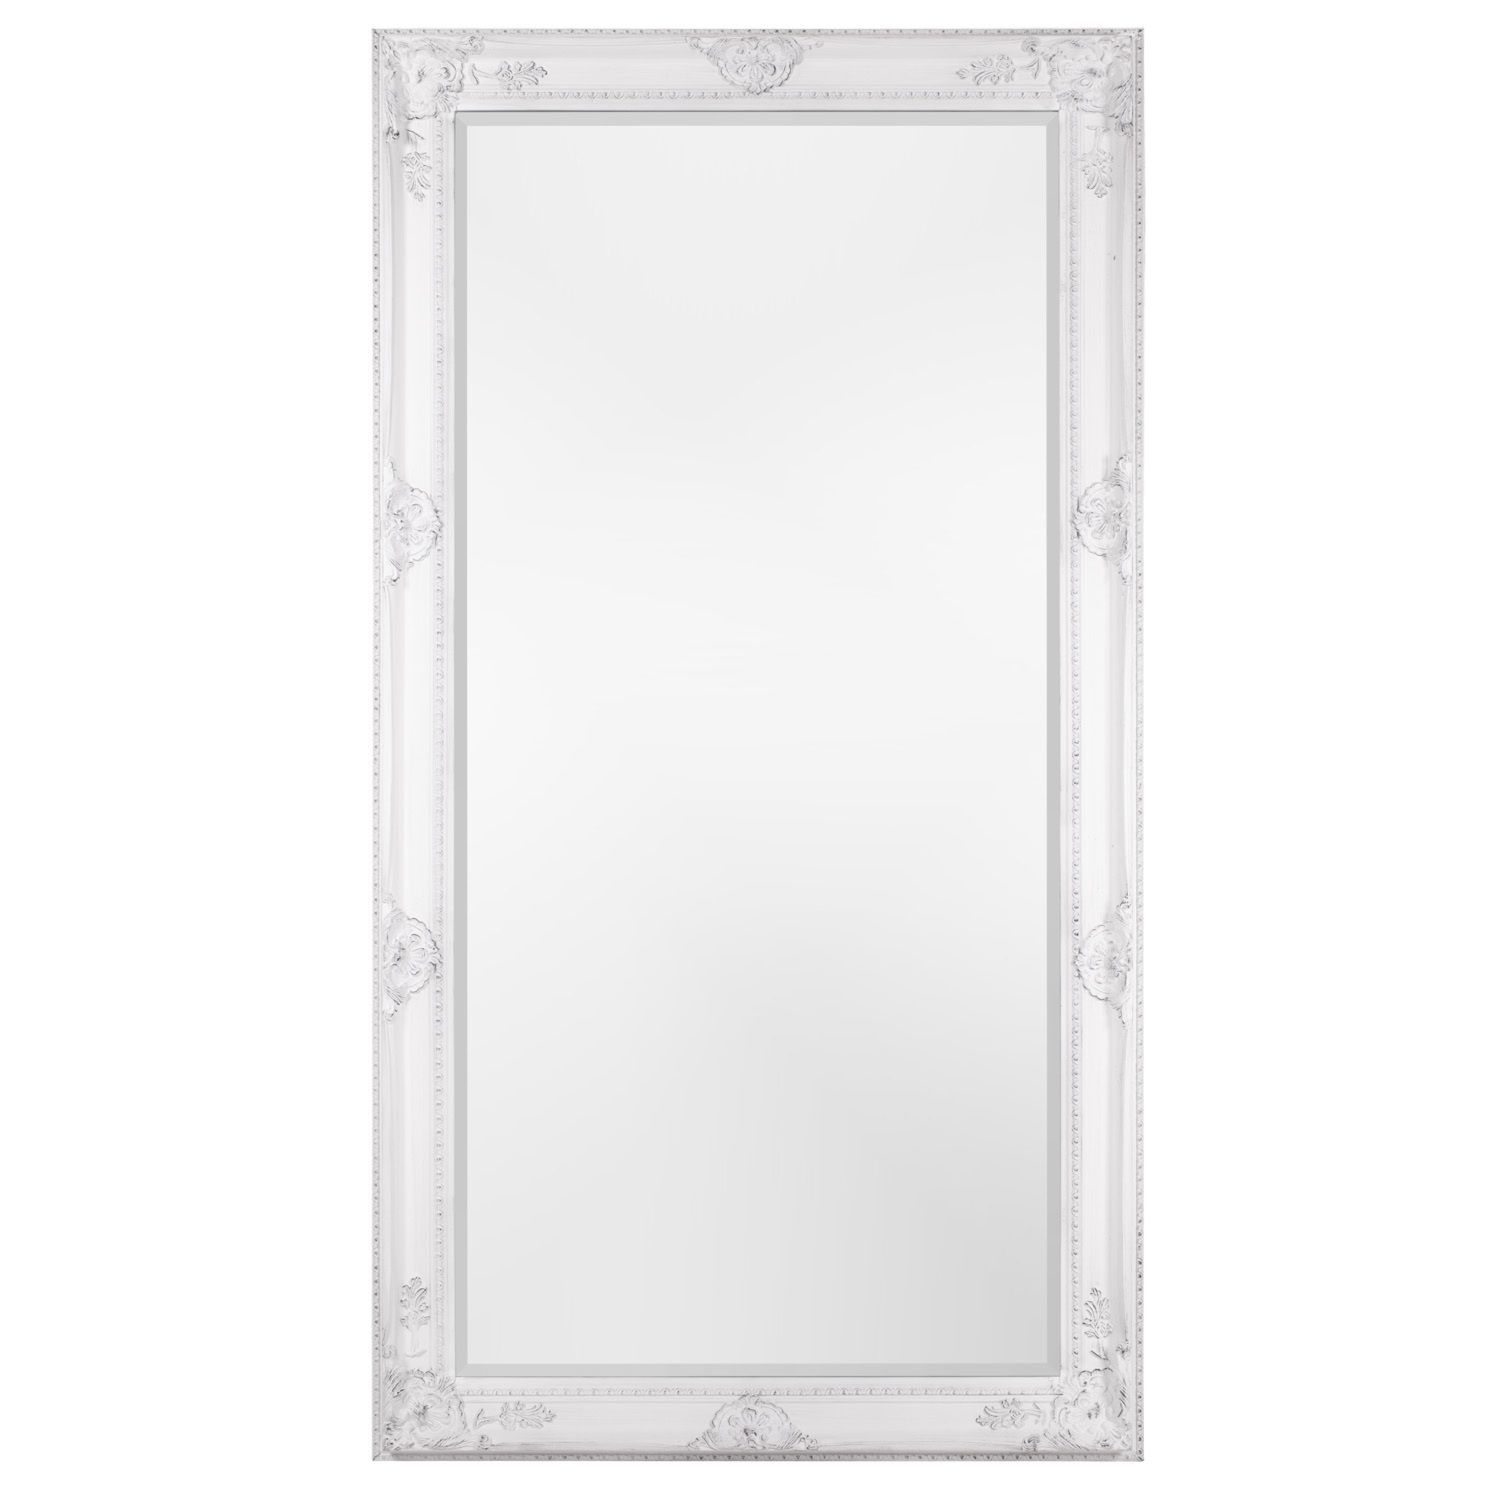 Pewter Ornate Mirror Poundstretcher 5999 To Hang Horizontally With Tall Ornate Mirror (View 15 of 15)